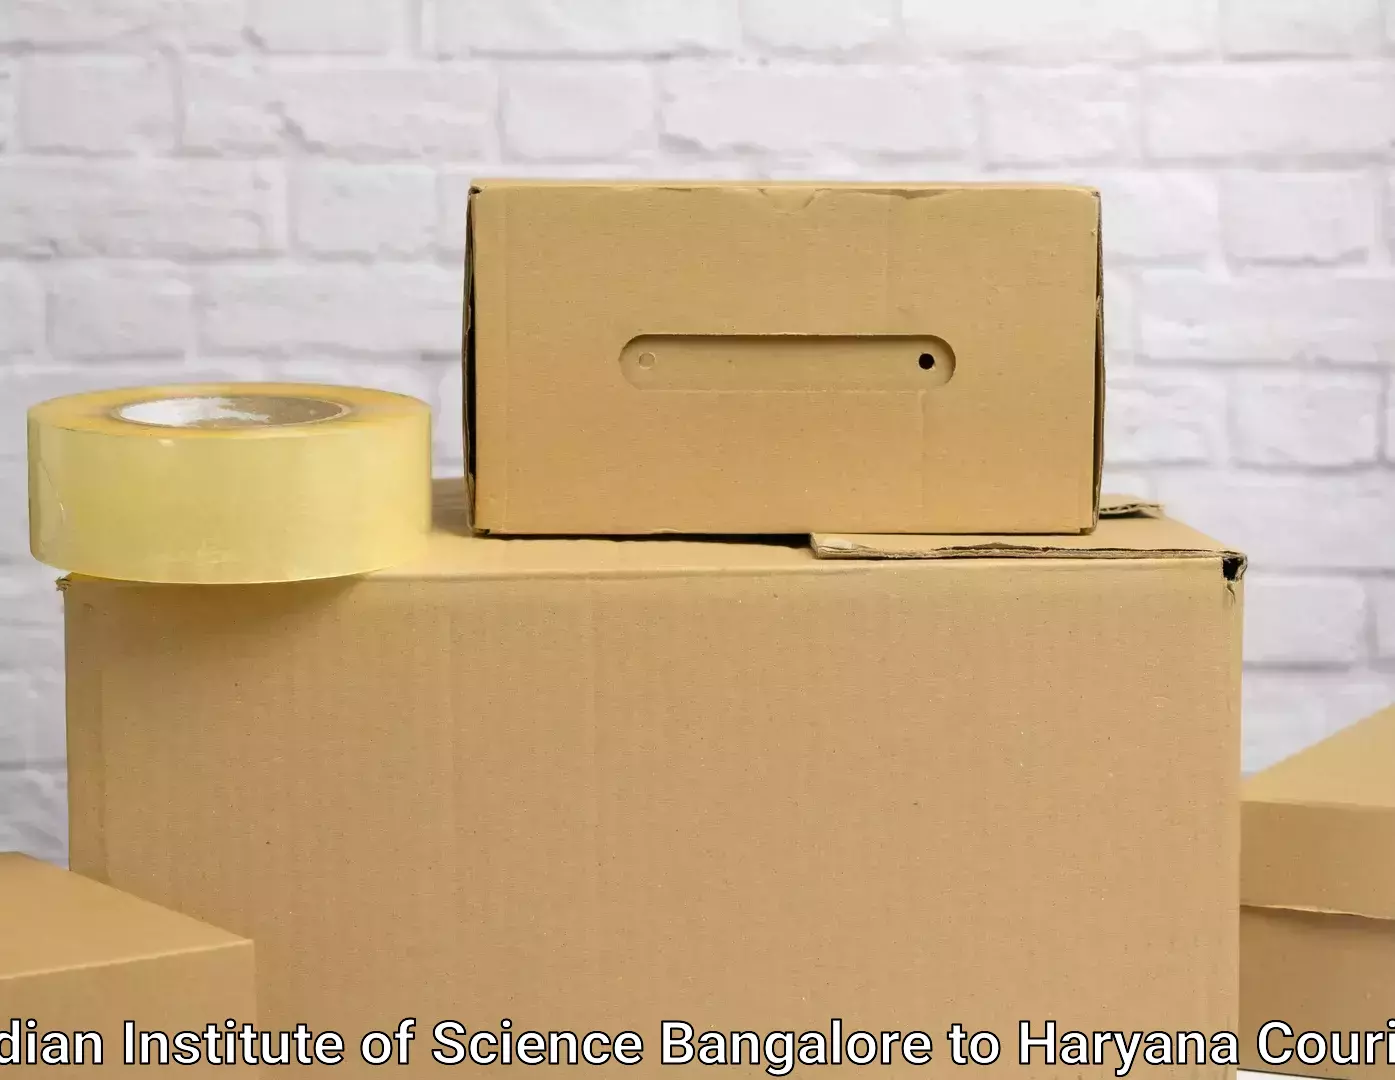 Moving service excellence Indian Institute of Science Bangalore to NCR Haryana